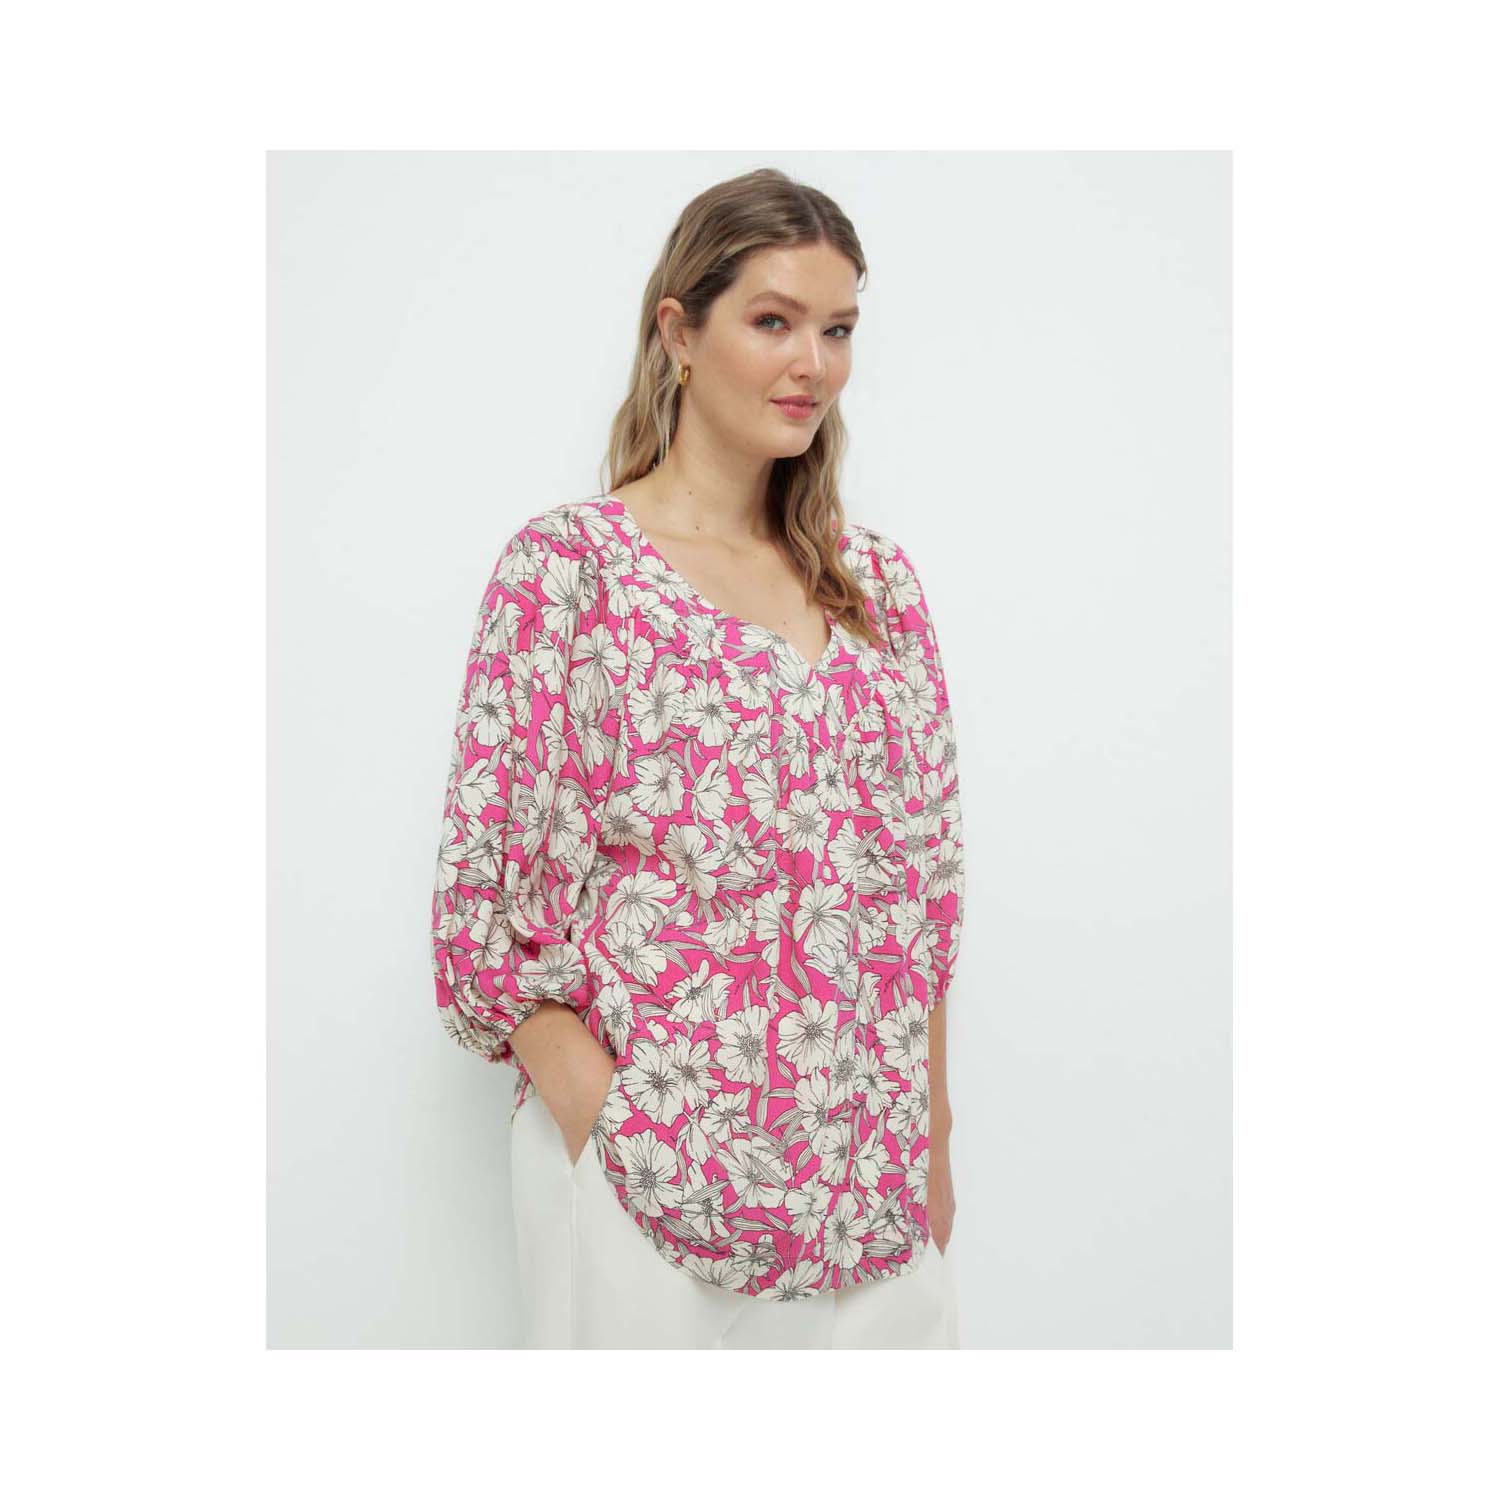 Couchel Printed French Sleeve Blouse - Fuchsia 2 Shaws Department Stores